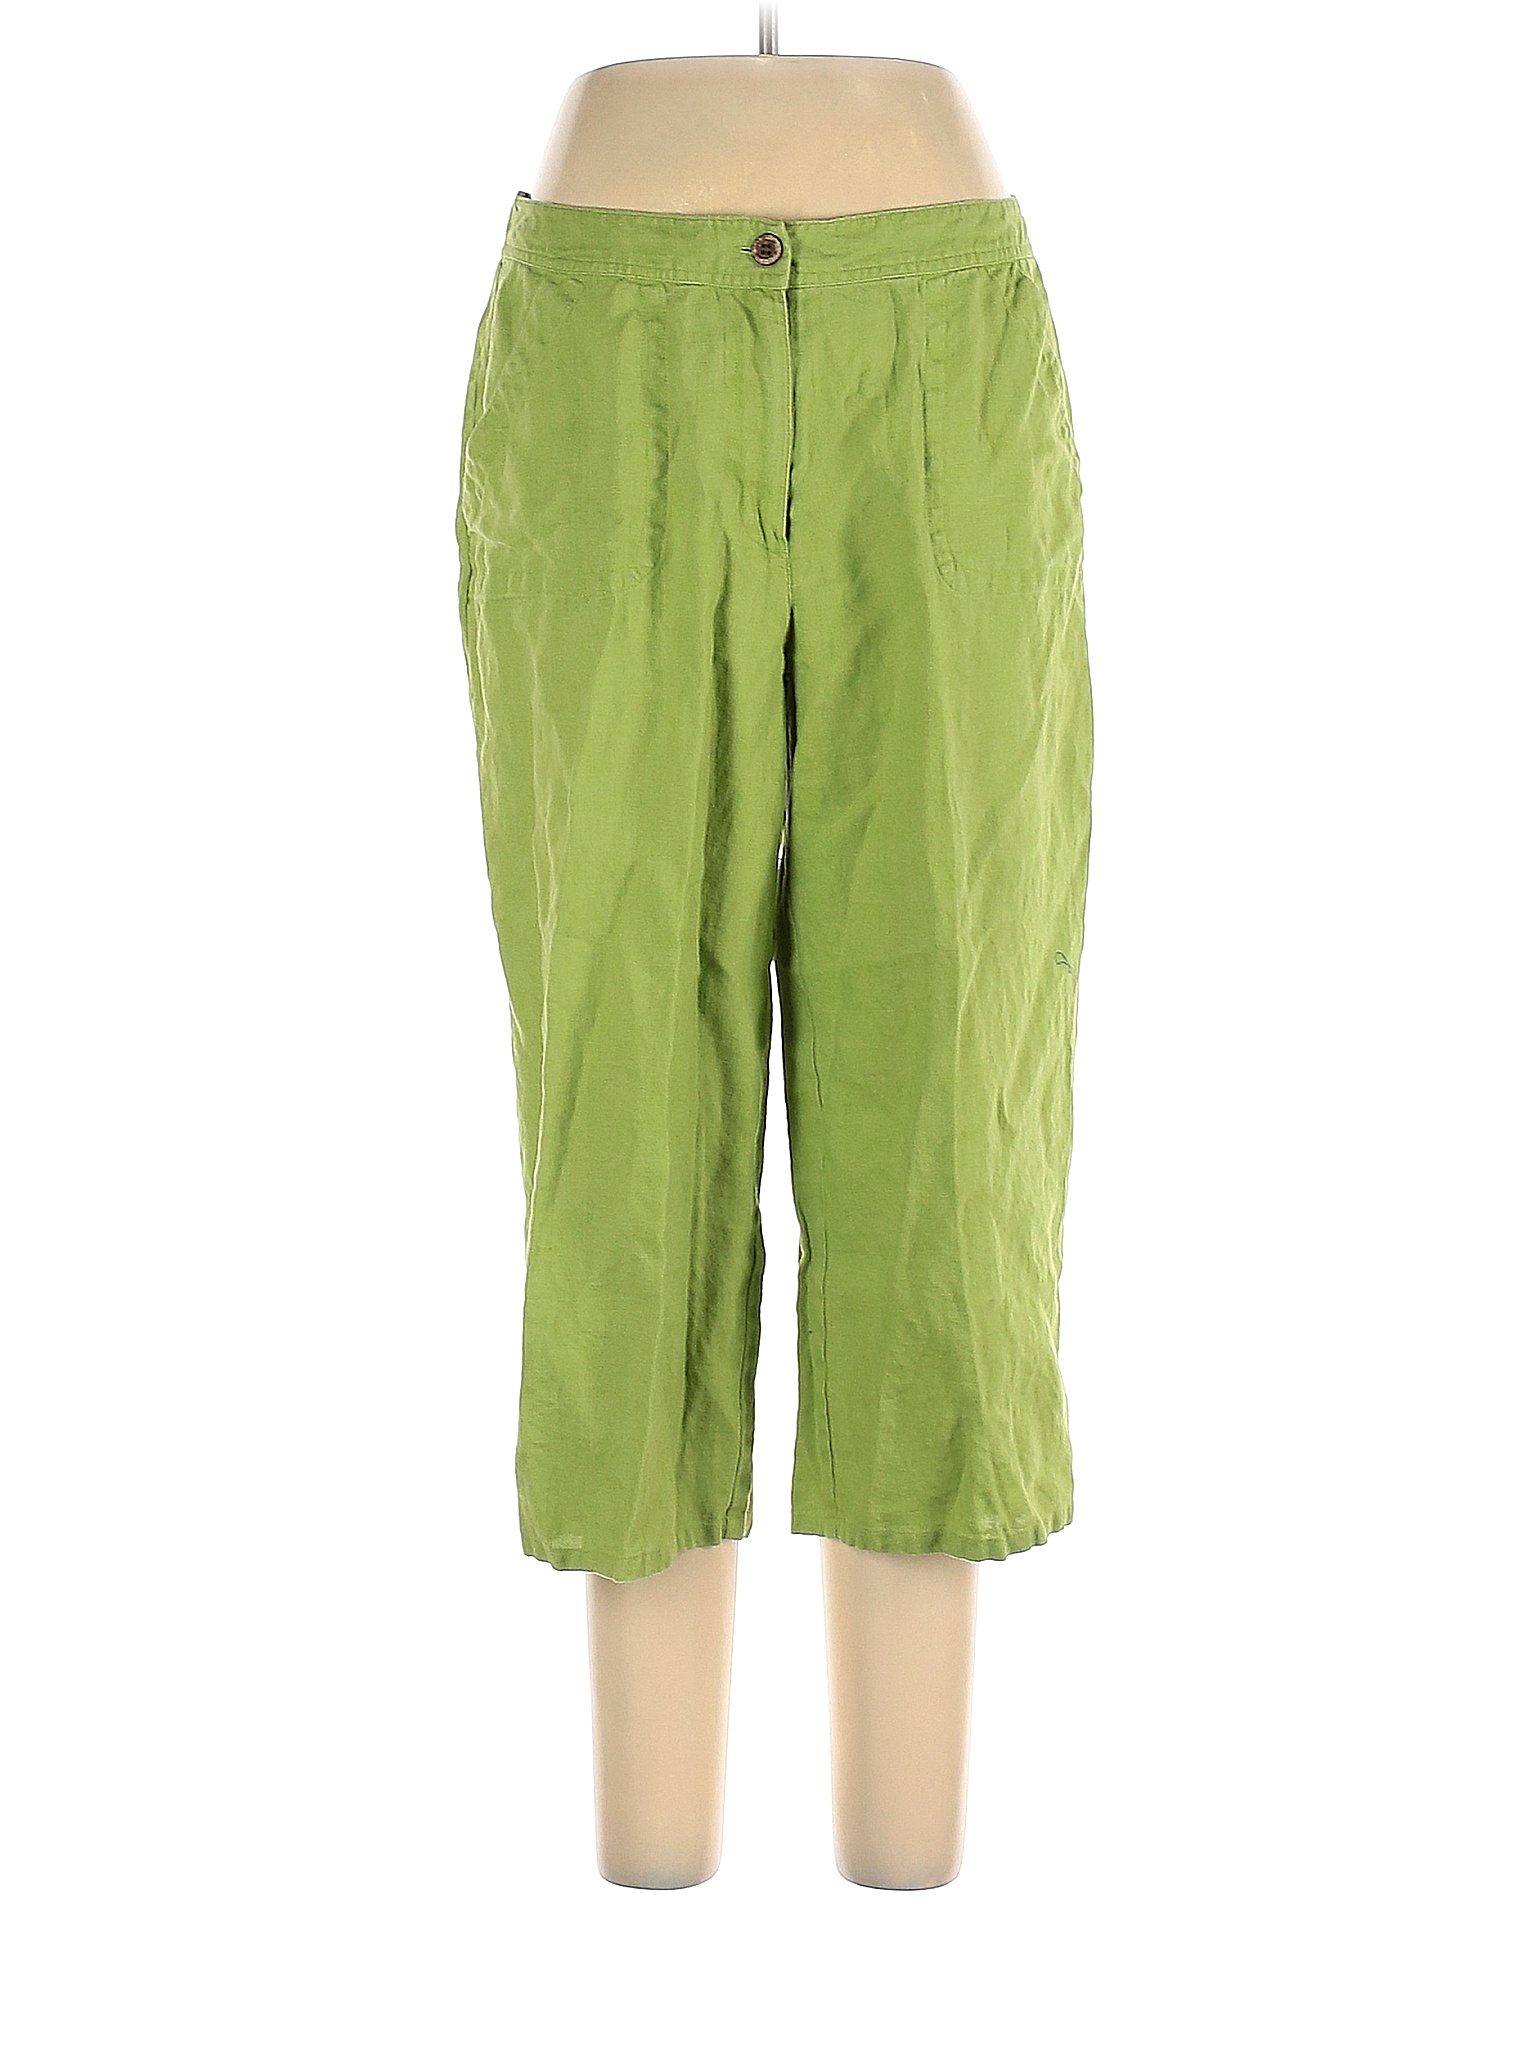 Chico's 100% Linen Solid Colored Green Linen Pants Size Lg (2.5) - 82% ...